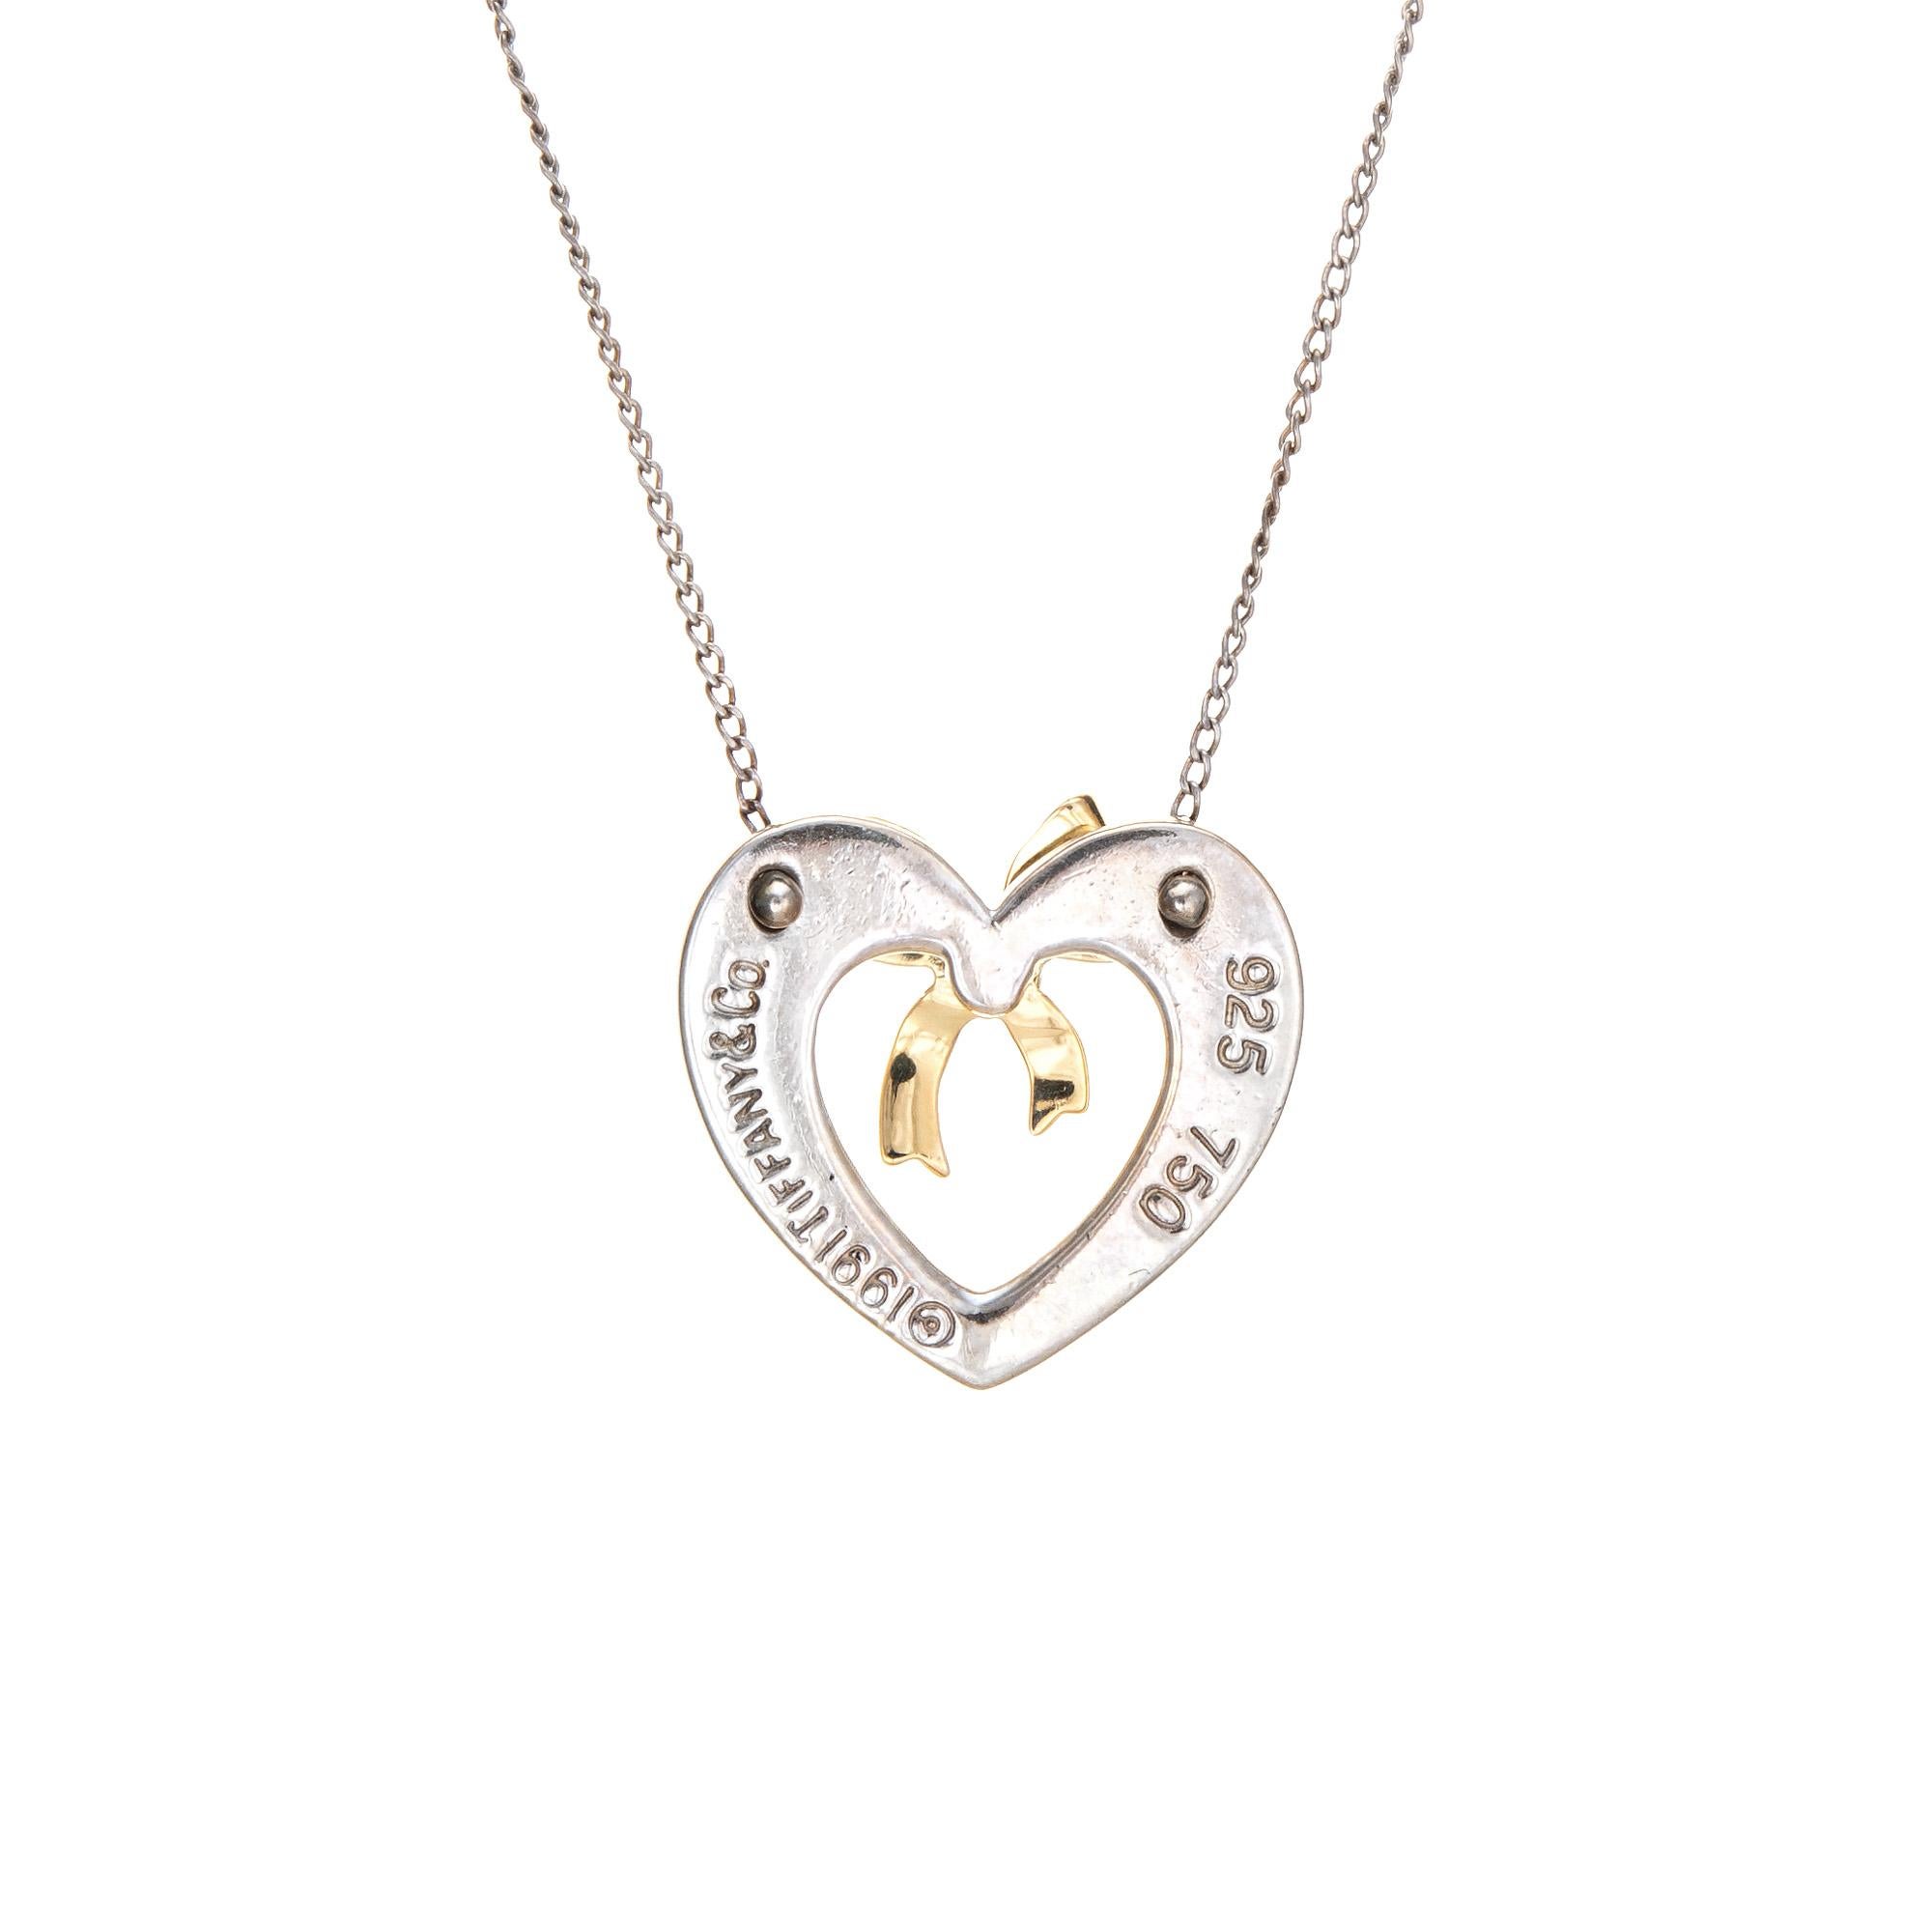 Stylish and finely detailed vintage Tiffany & Co heart & bow necklace, crafted in sterling silver and 18k yellow gold (circa 1991).  

The sweet heart shaped necklace features a bow to the center in 18k yellow gold. Measuring 18 inches in length the